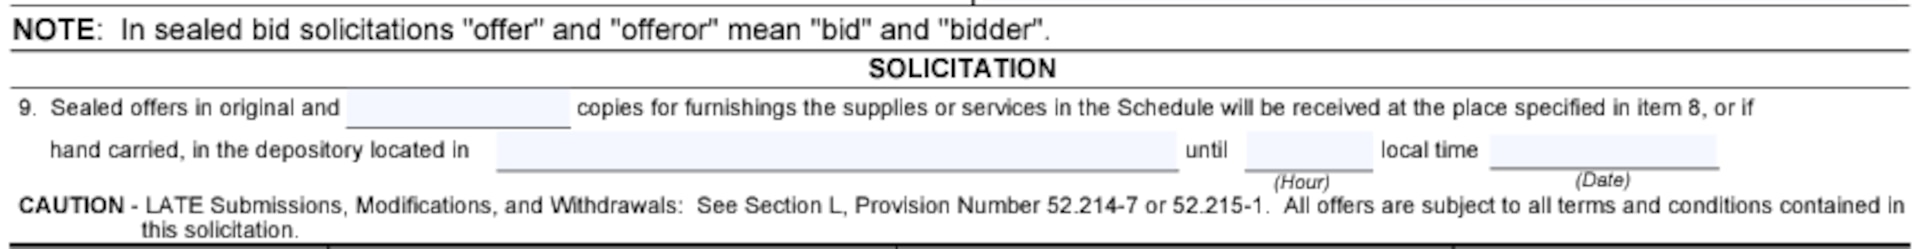 Box 9 of the Solicitation, Offer, and Award Form (SF33) for submission instructions relating to solicitation. See adjacent text or context for equivalent information of image.